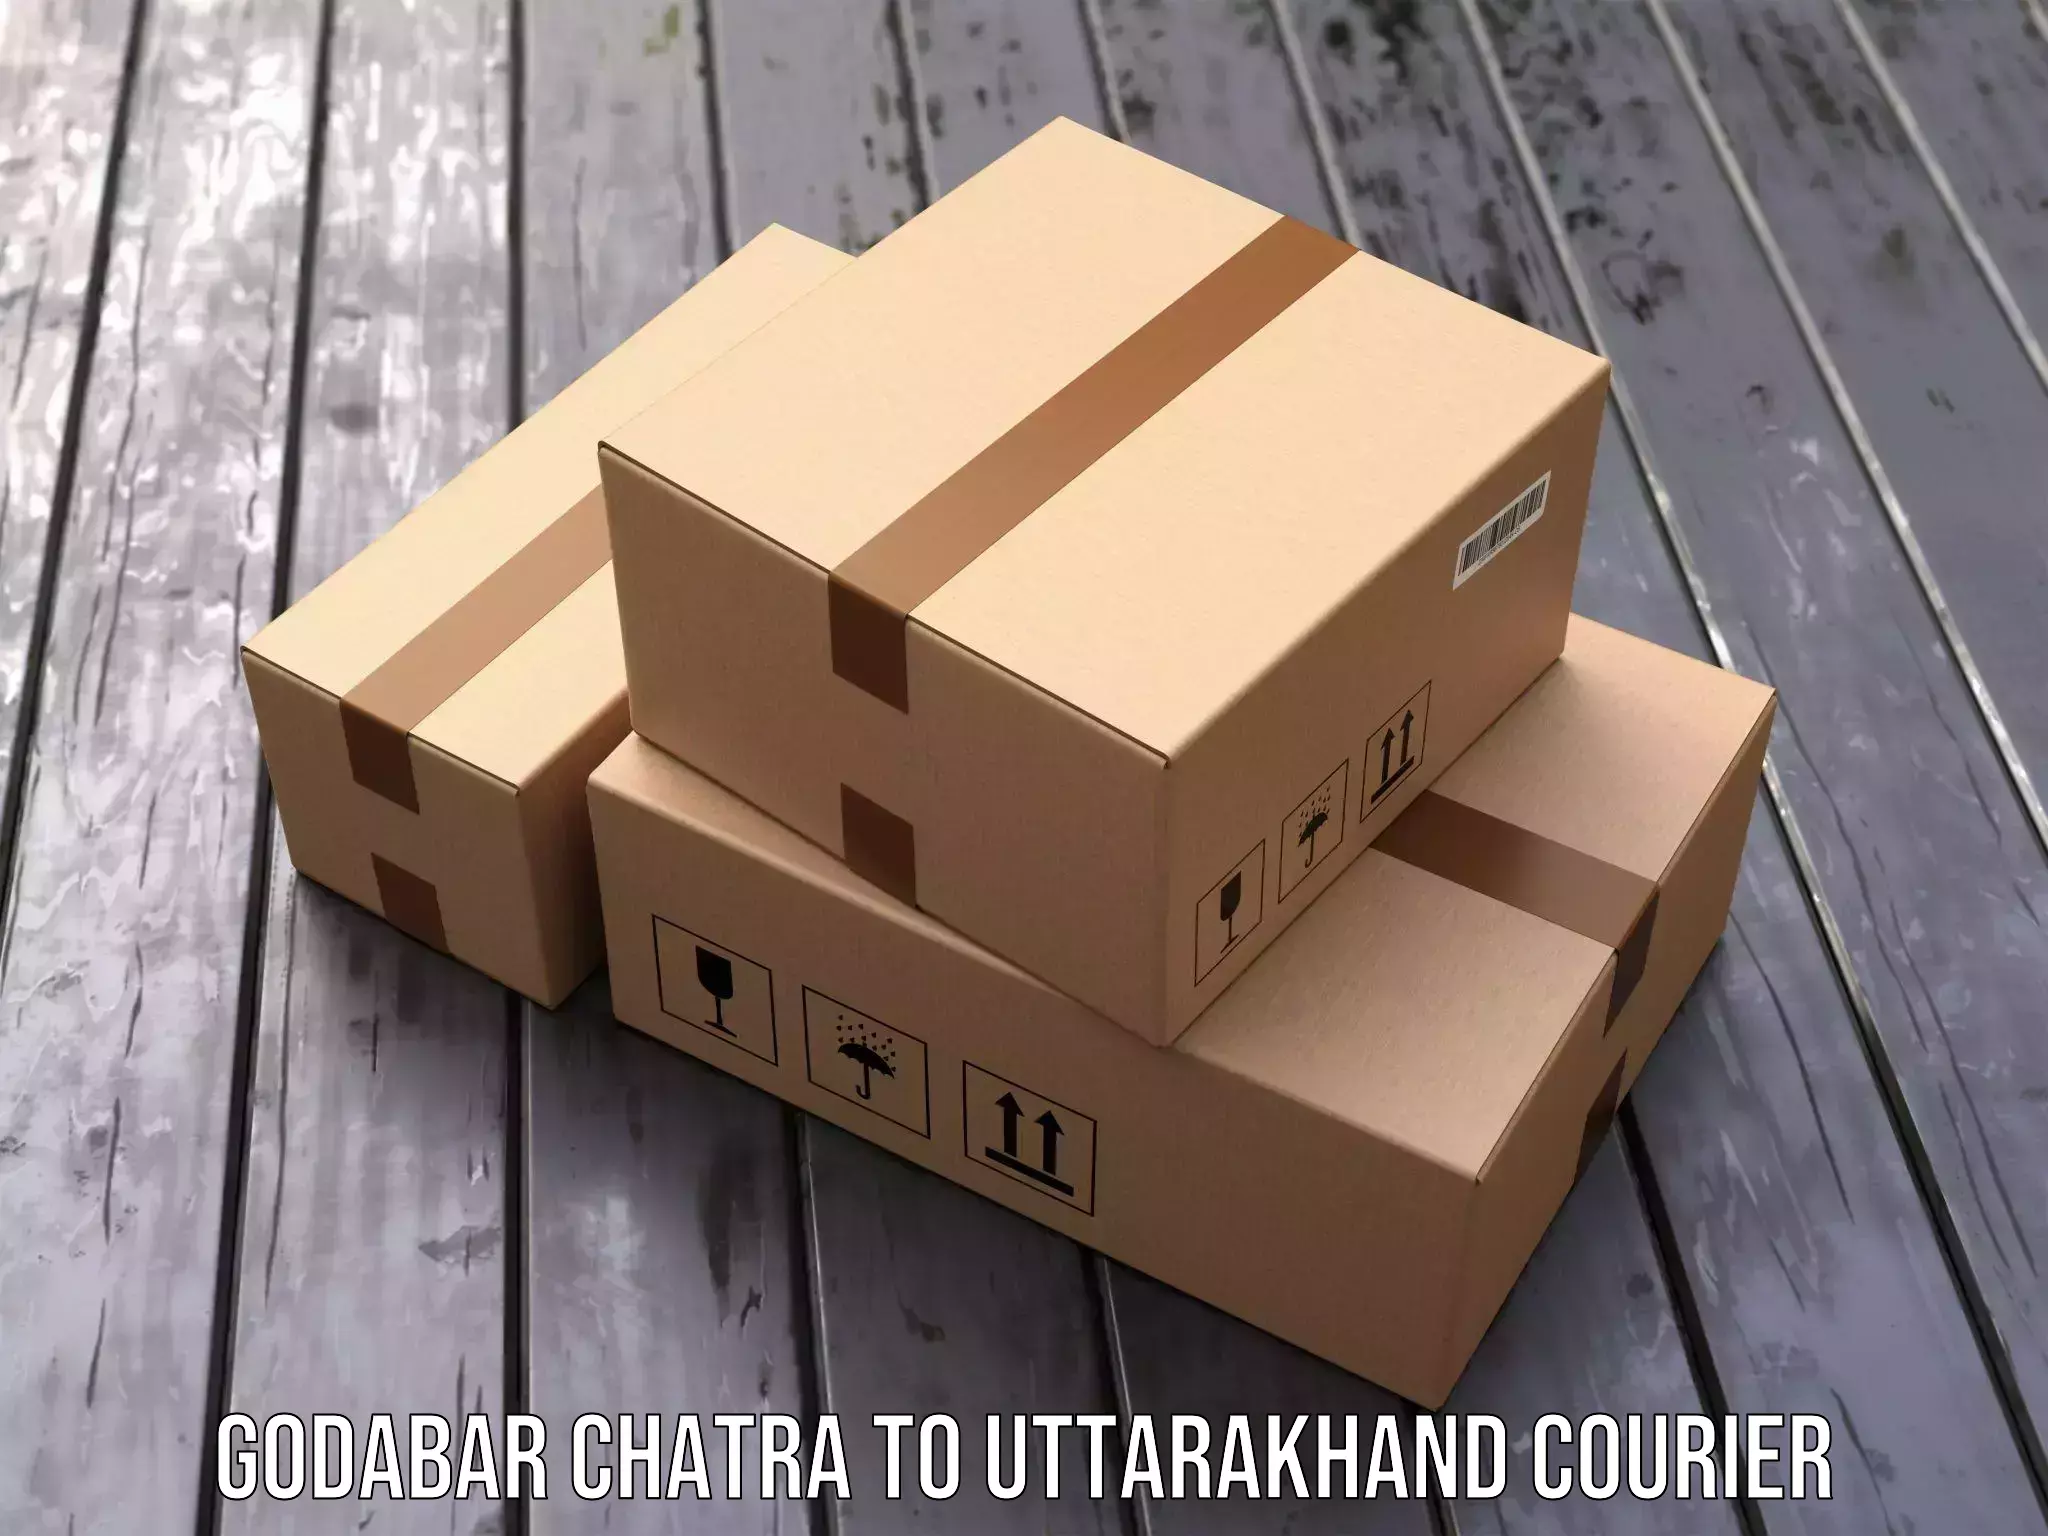 Professional parcel services in Godabar Chatra to Haridwar